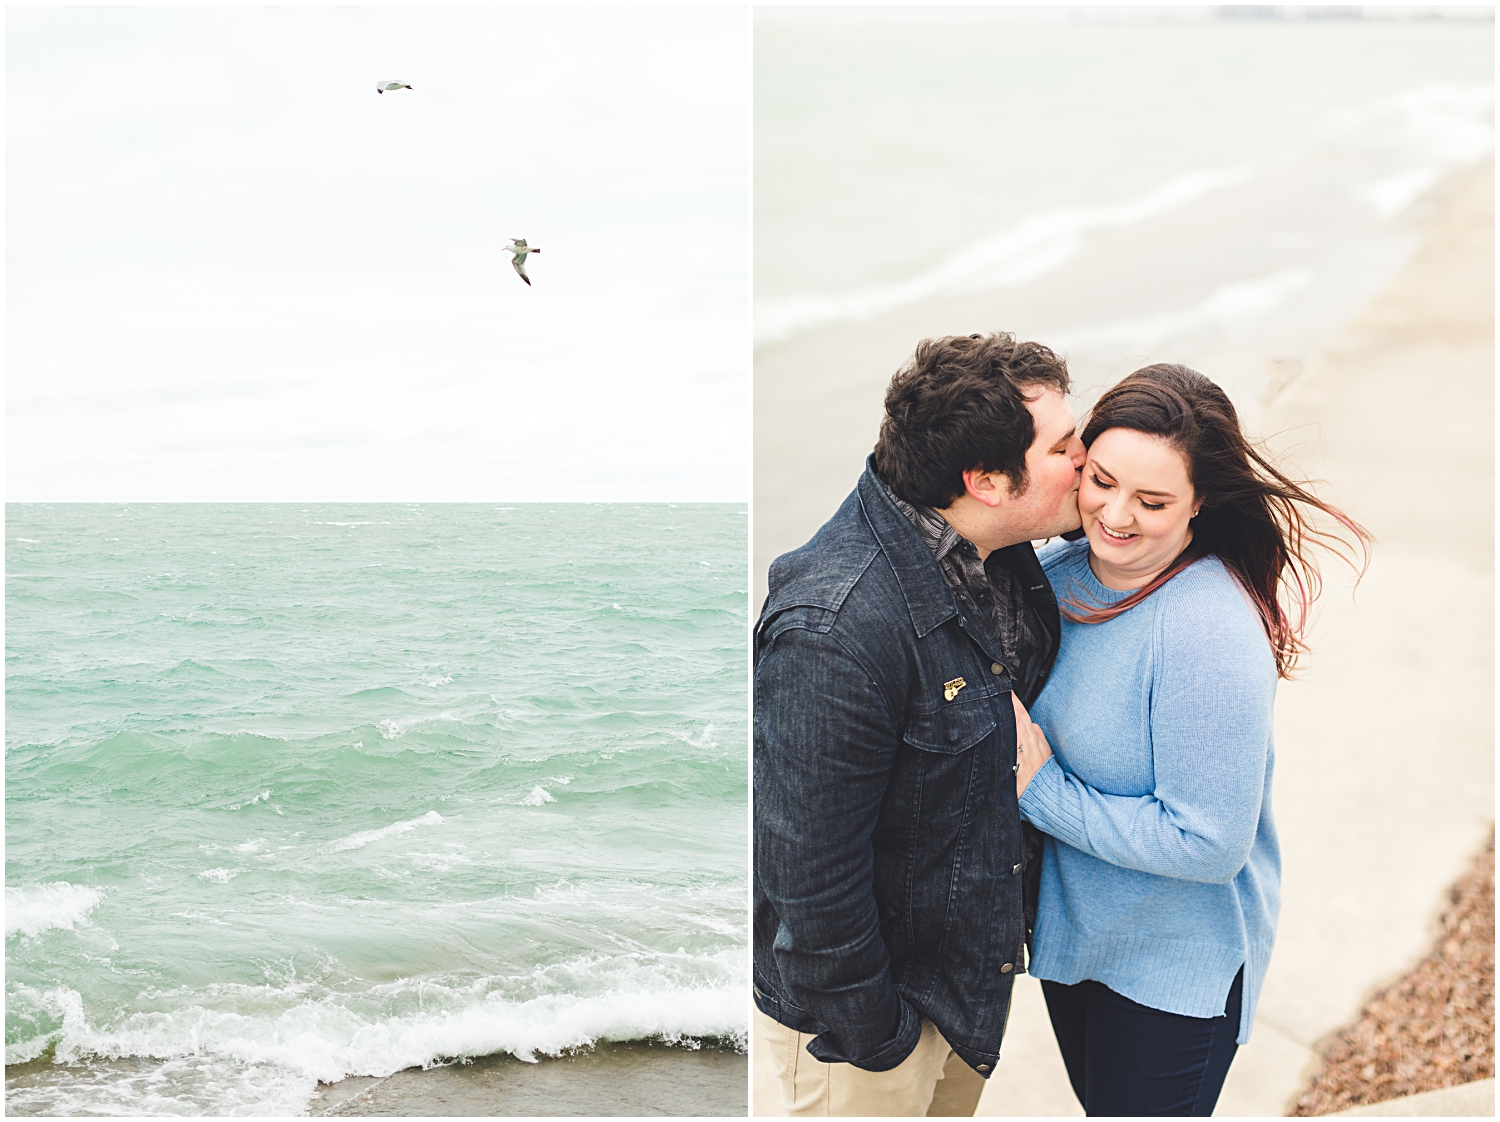 chicago, chicago il, chicago engagement, chicago engagement session, chicago skyline, lake michigan, windy city, engagement photographer, midwest engagement photographer, iowa wedding photographer, chicago wedding photographer